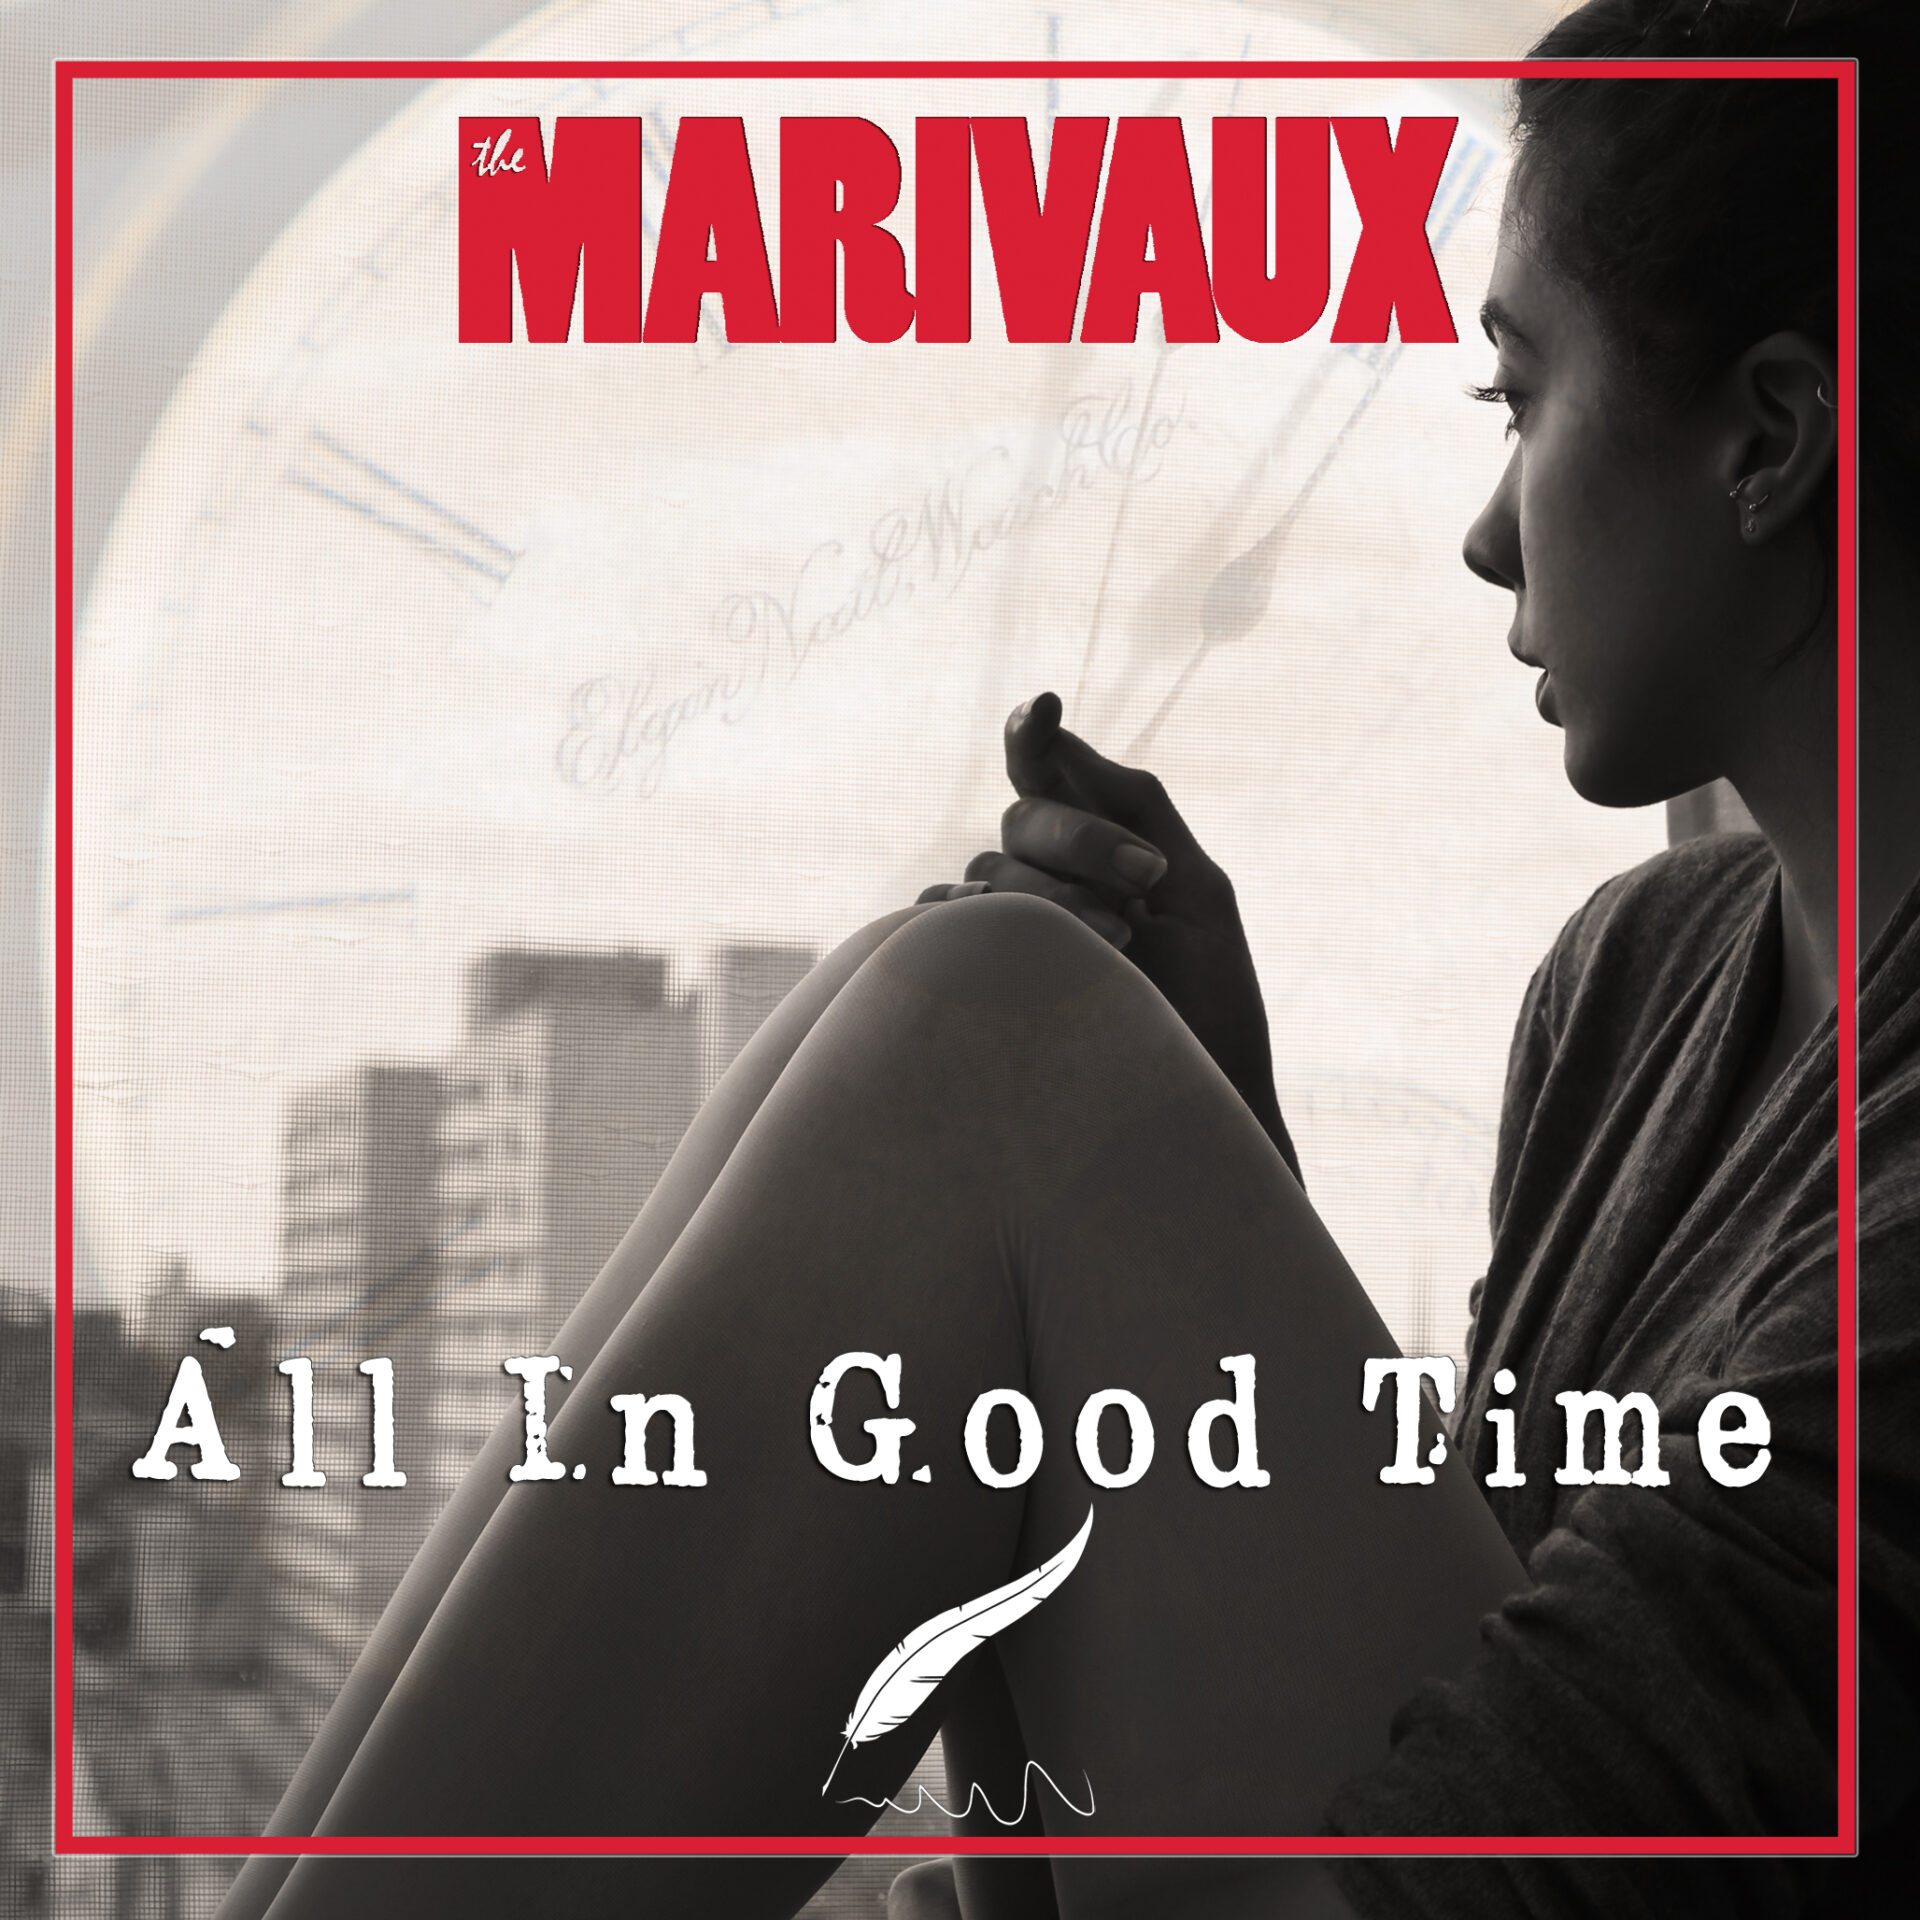 VIDEO: The Marivaux - All In Good Time 1